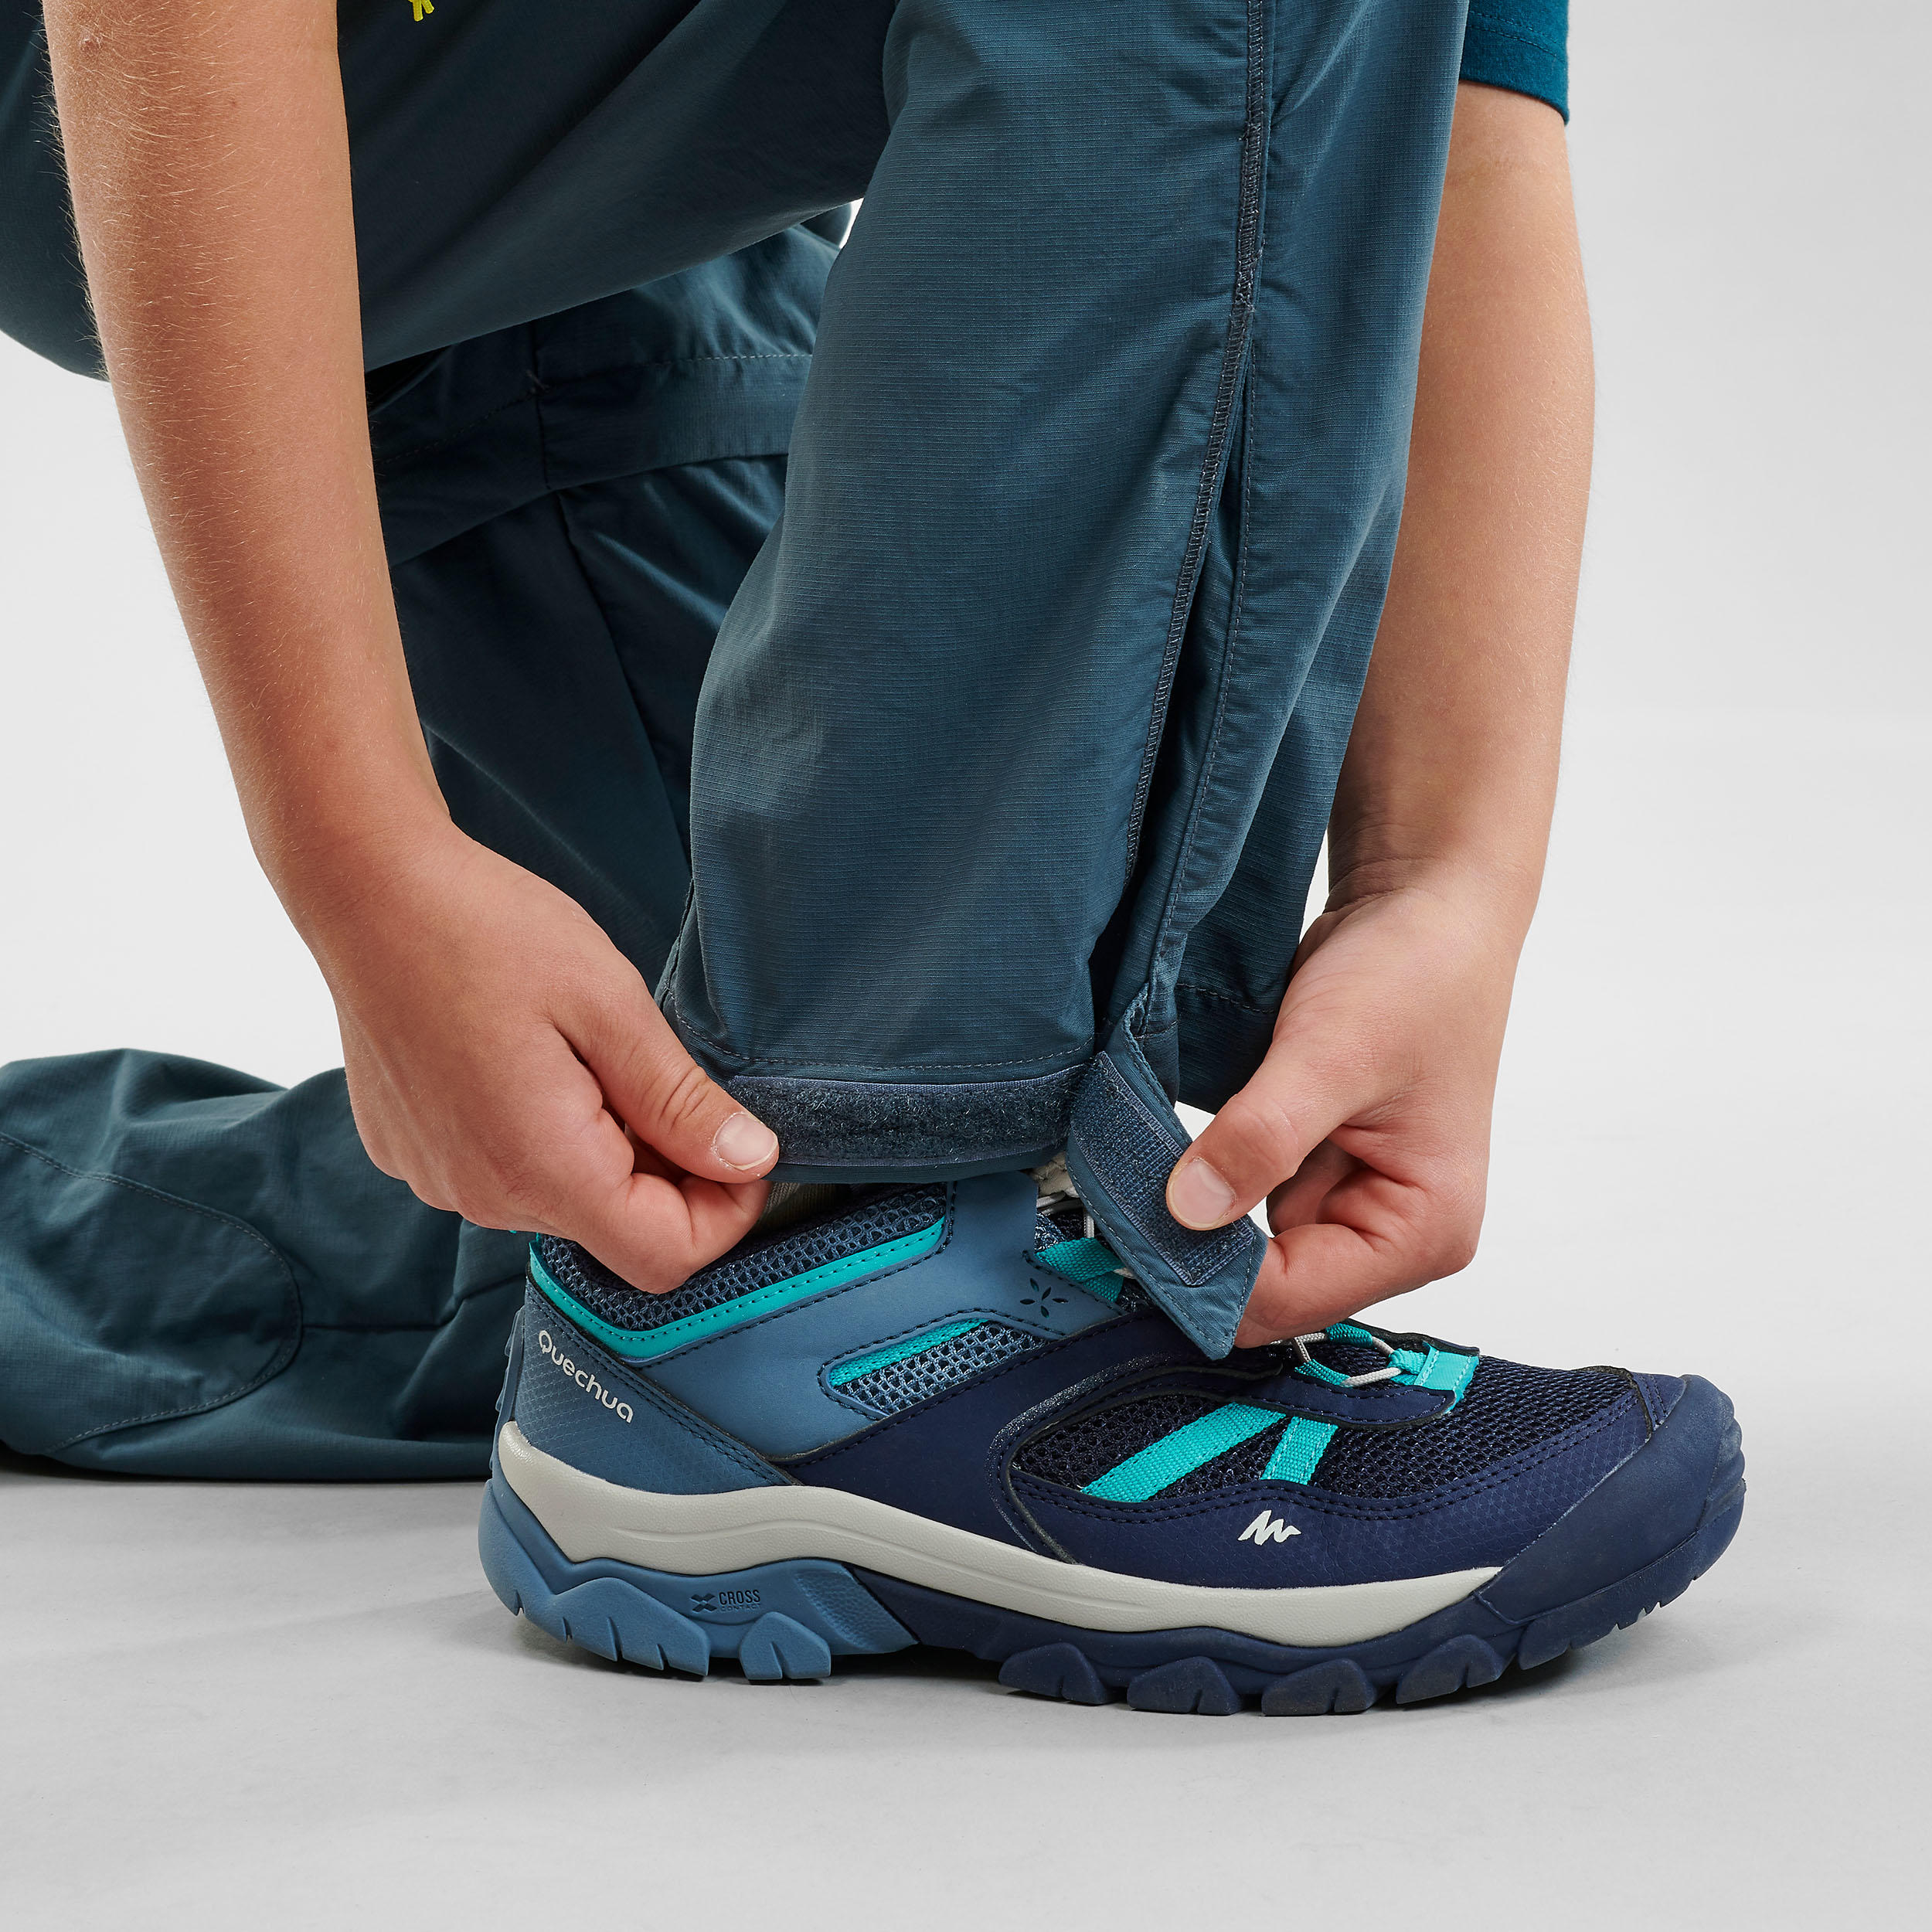 Kids’ Modular Hiking Trousers MH500 KID Aged 7-15 Turquoise 8/10